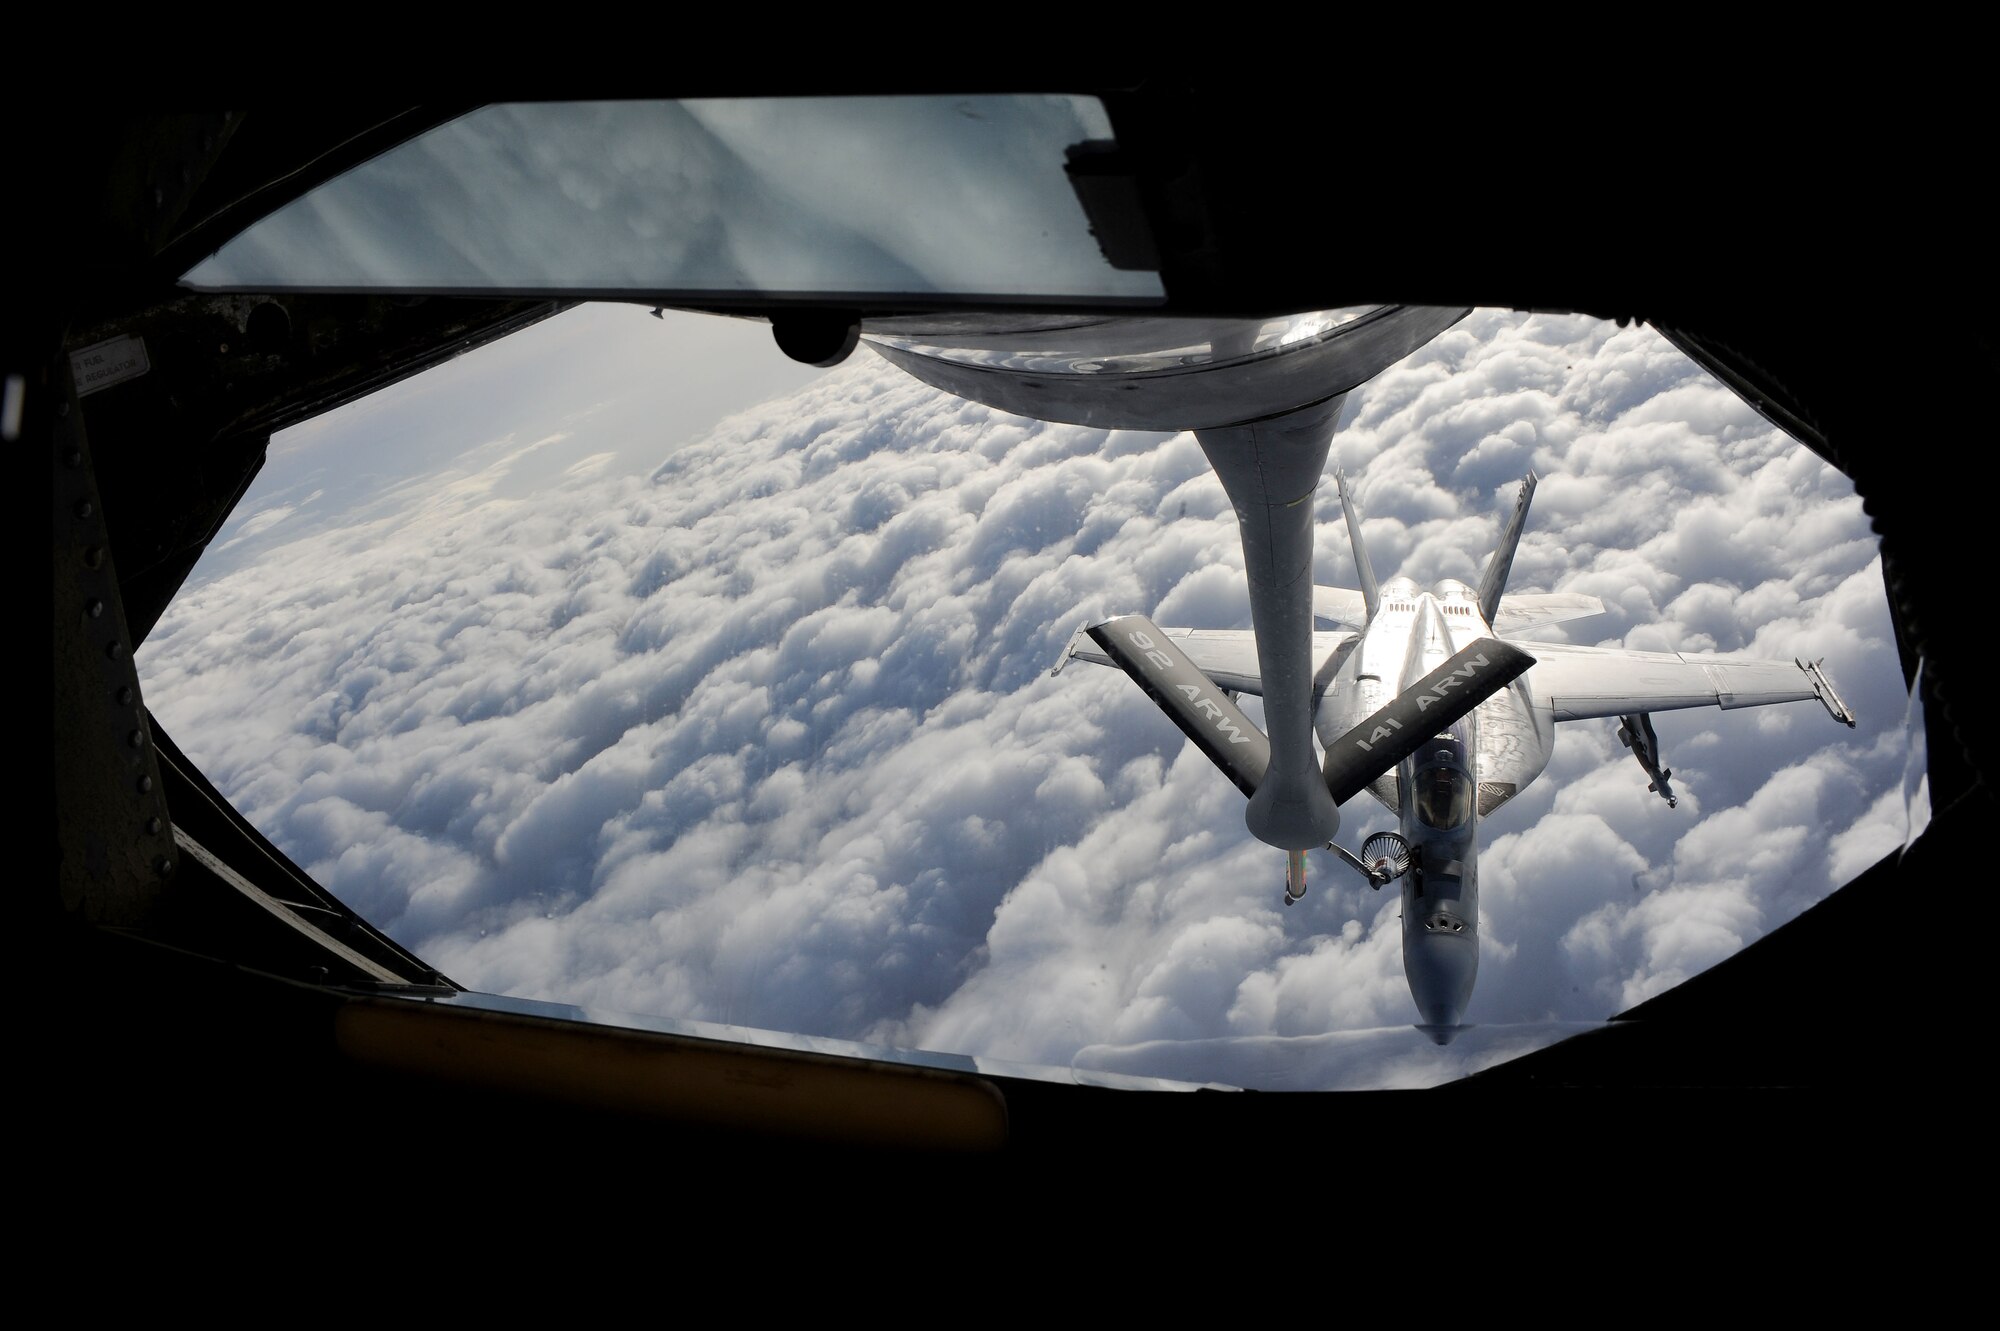 A U.S. Navy F/A-18 Hornet Strikefighter receives fuel from a 22nd Expeditionary Air Refueling Squadron KC-135 Stratotanker over Afghanistan April 10, 2010. The day of April 10 made 22nd EARS history when an air crew logged the 16,000th sortie. (U.S. Air Force photo/Senior Airman Nichelle Anderson/released)